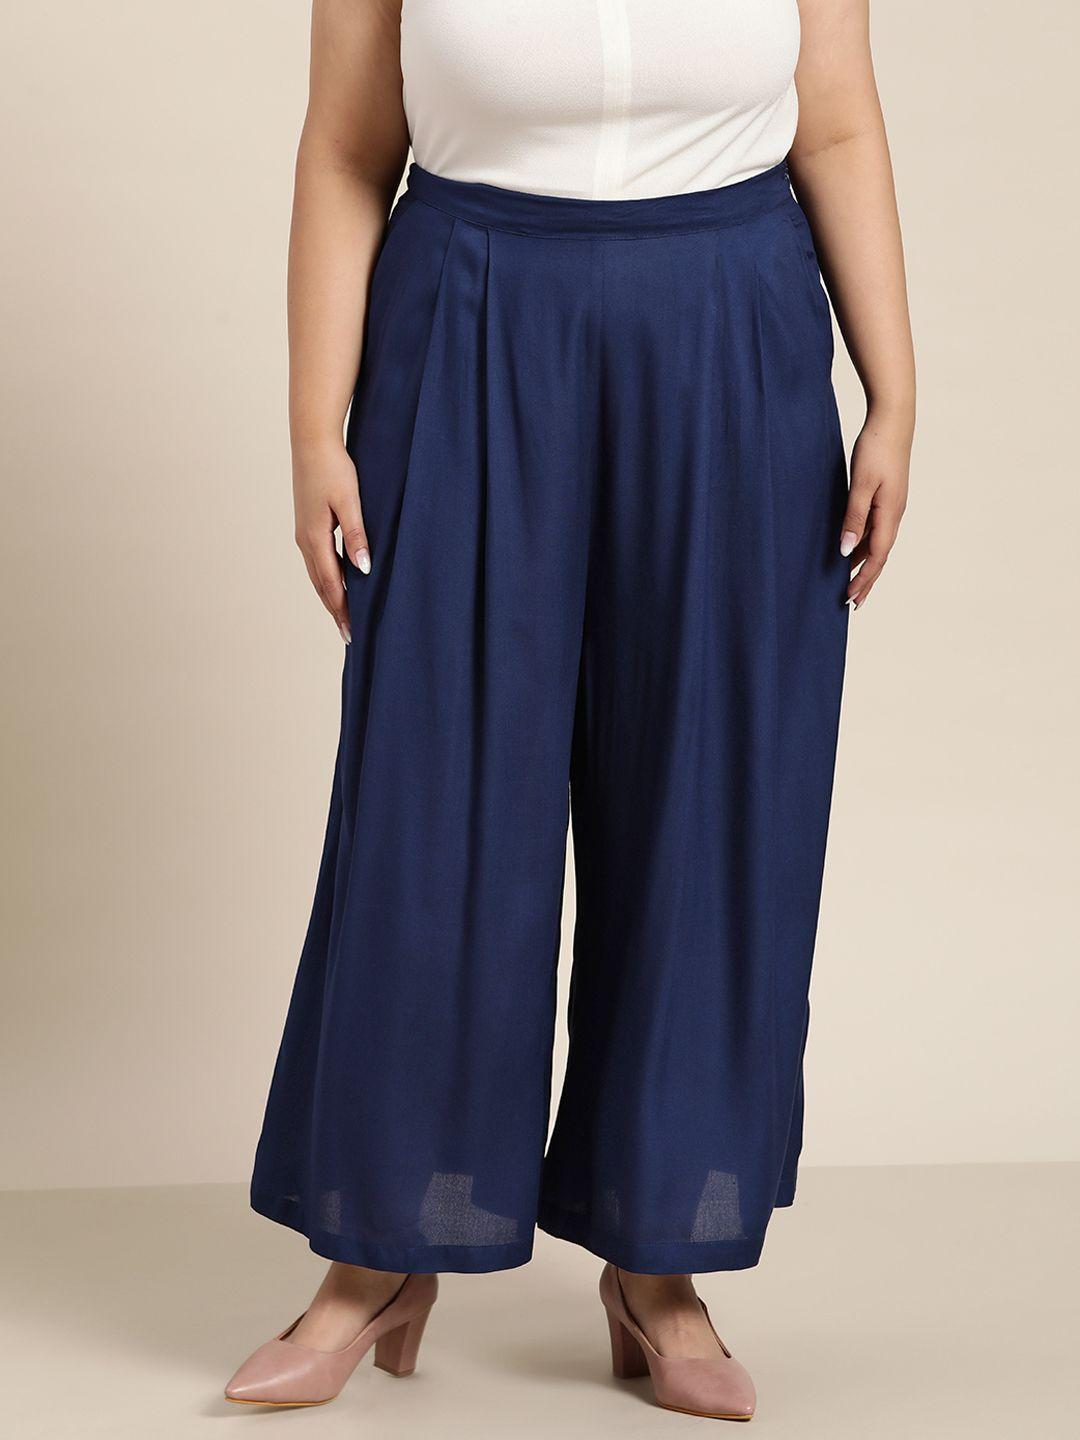 sztori women plus size navy blue solid pleated culottes trousers